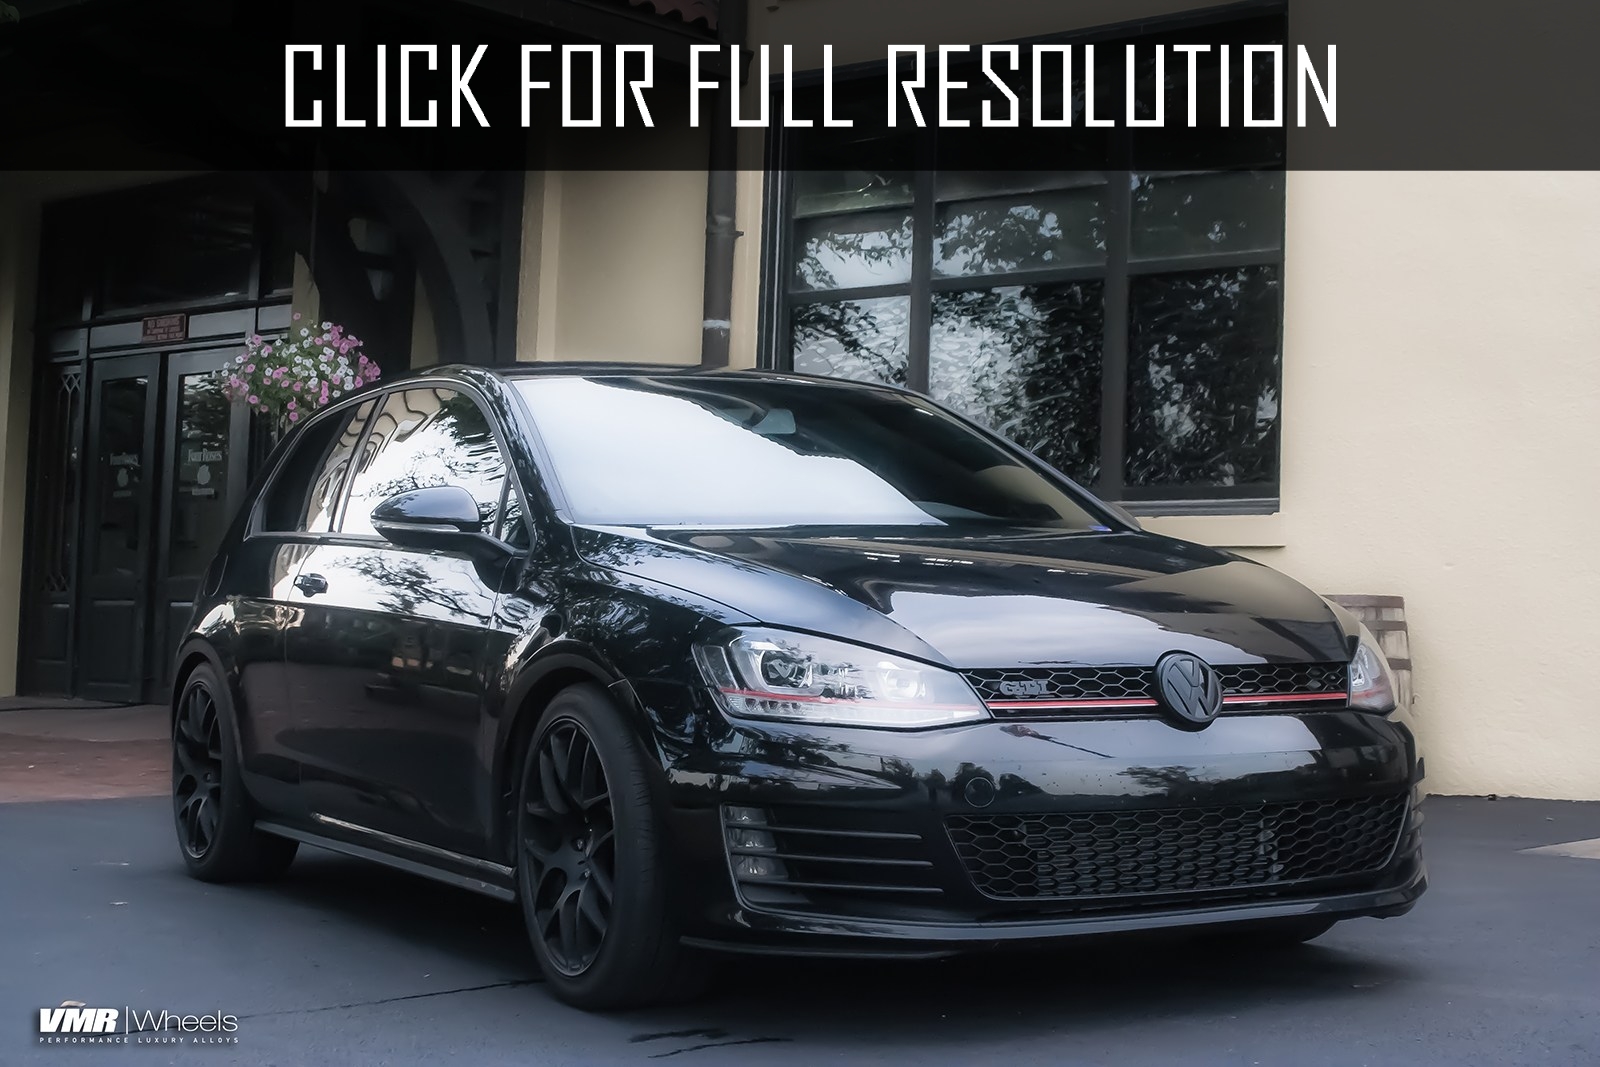 Volkswagen Golf Gti Modified amazing photo gallery, some information